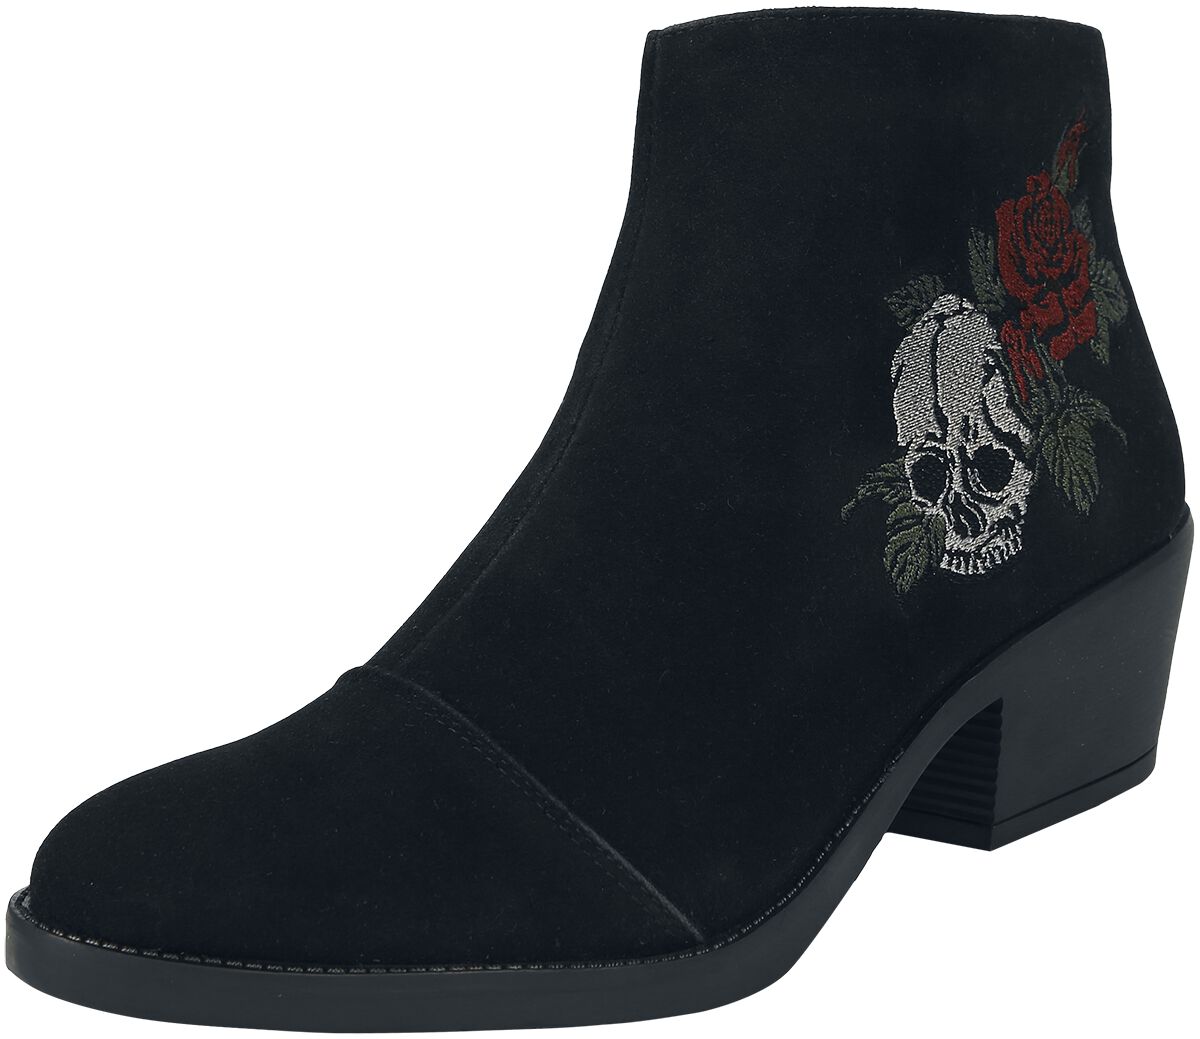 Rock Rebel by EMP Boot with Rose an Skull embroidery Stiefel schwarz in EU40